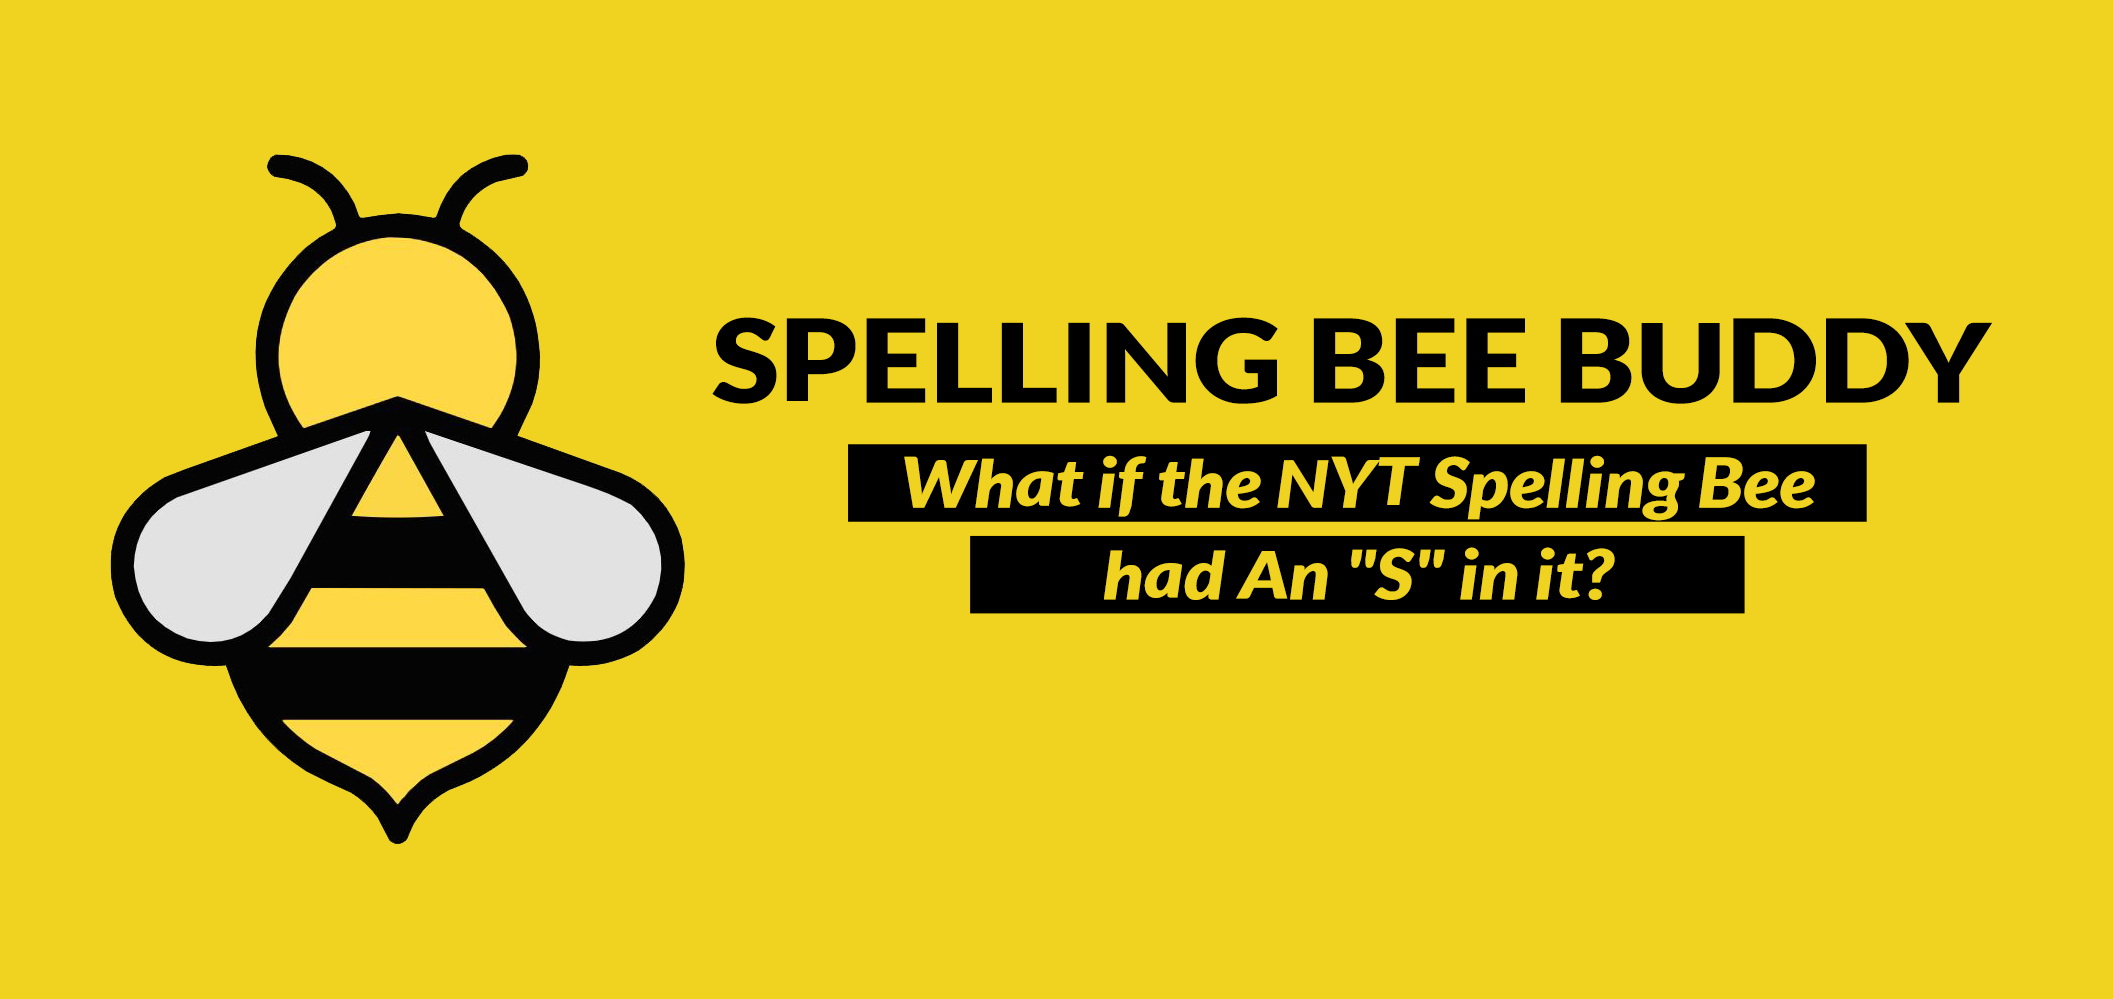 NYT Spelling Bee had An S